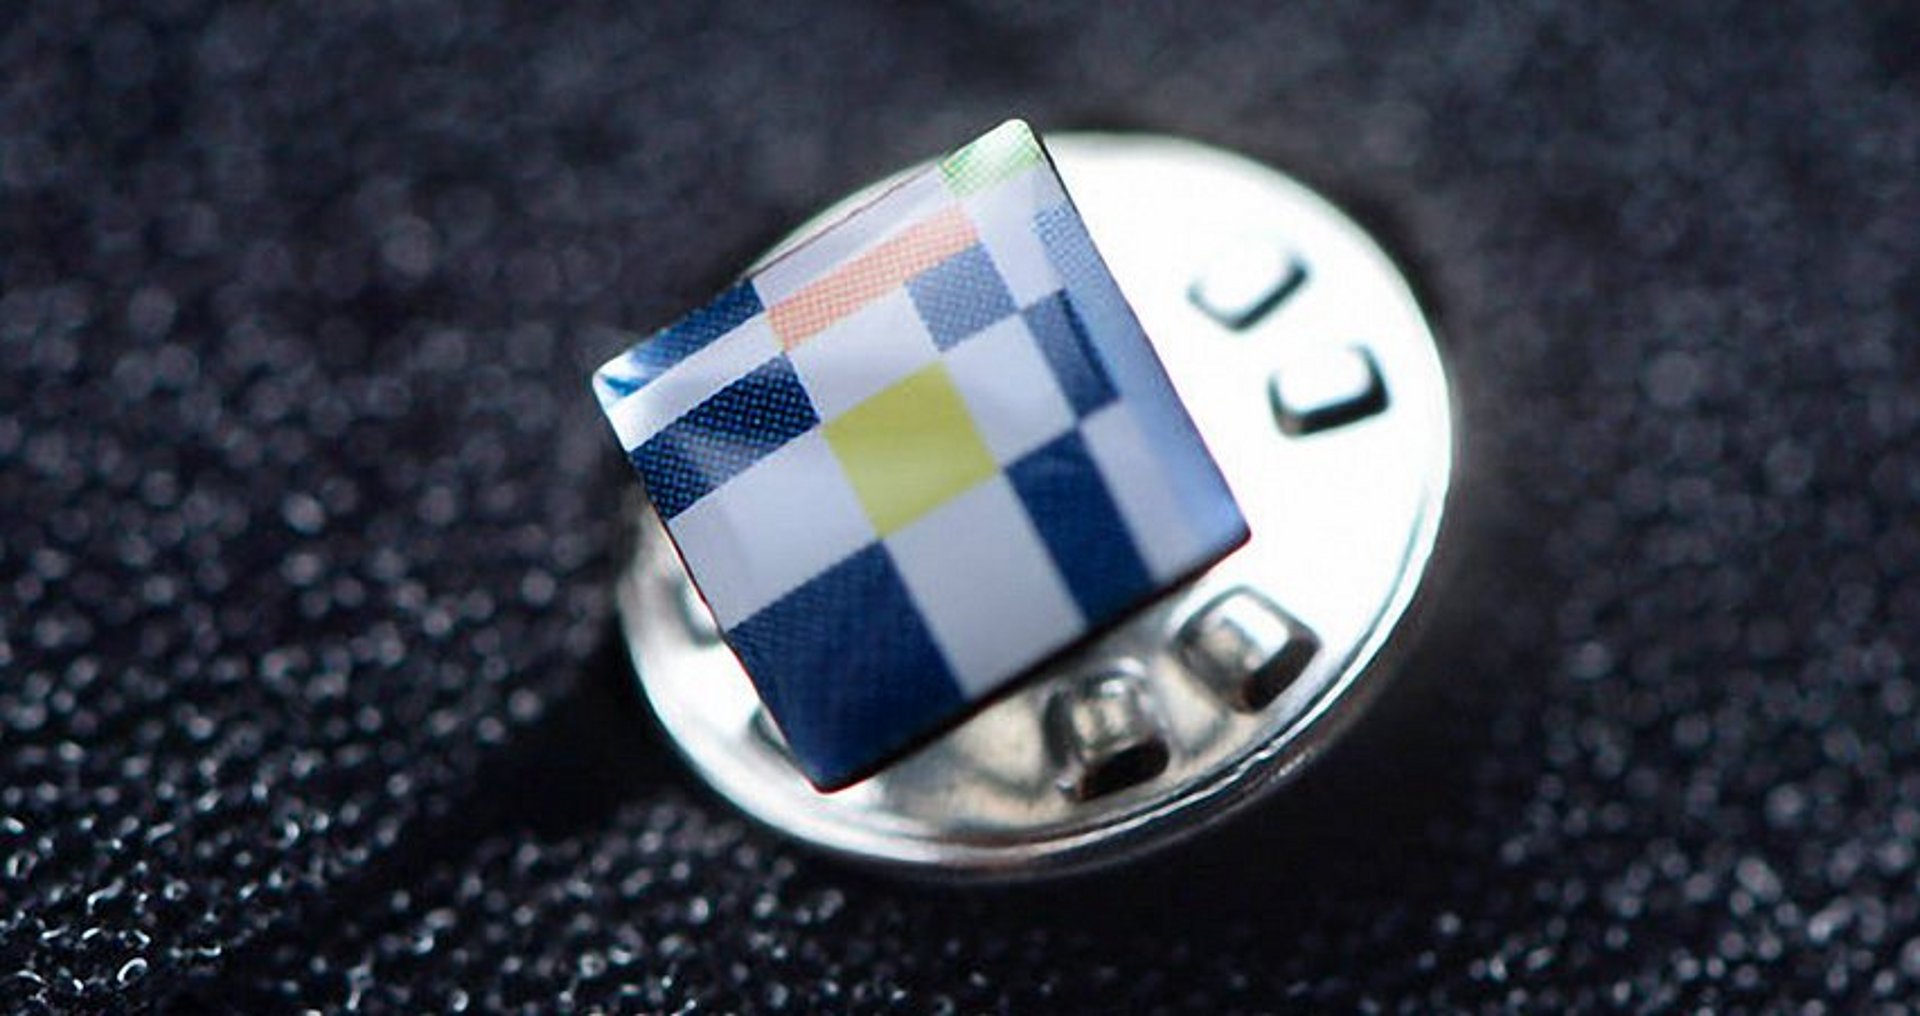 Members of acatech wear the logo of the academy on their lapel.